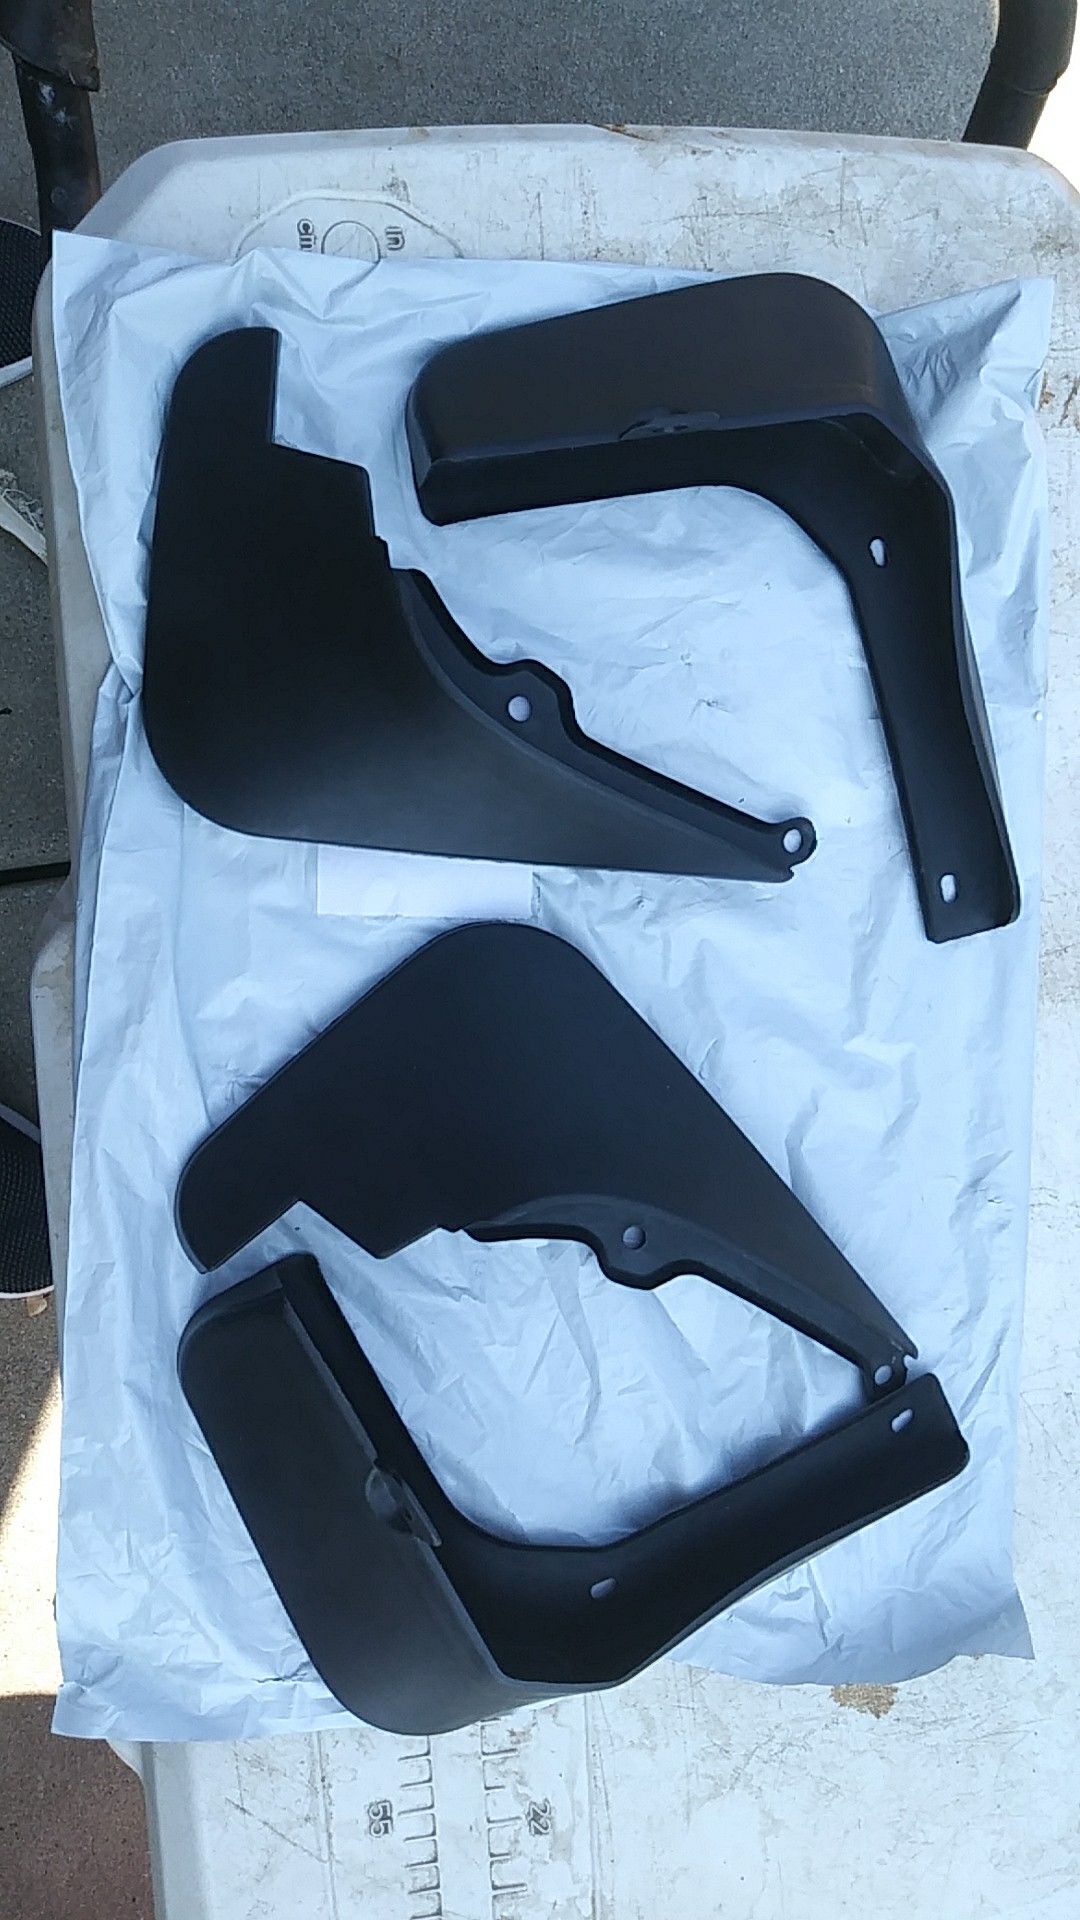 Mud deflectors for small truck or car. There are no part numbers so i dont know for what kind of car